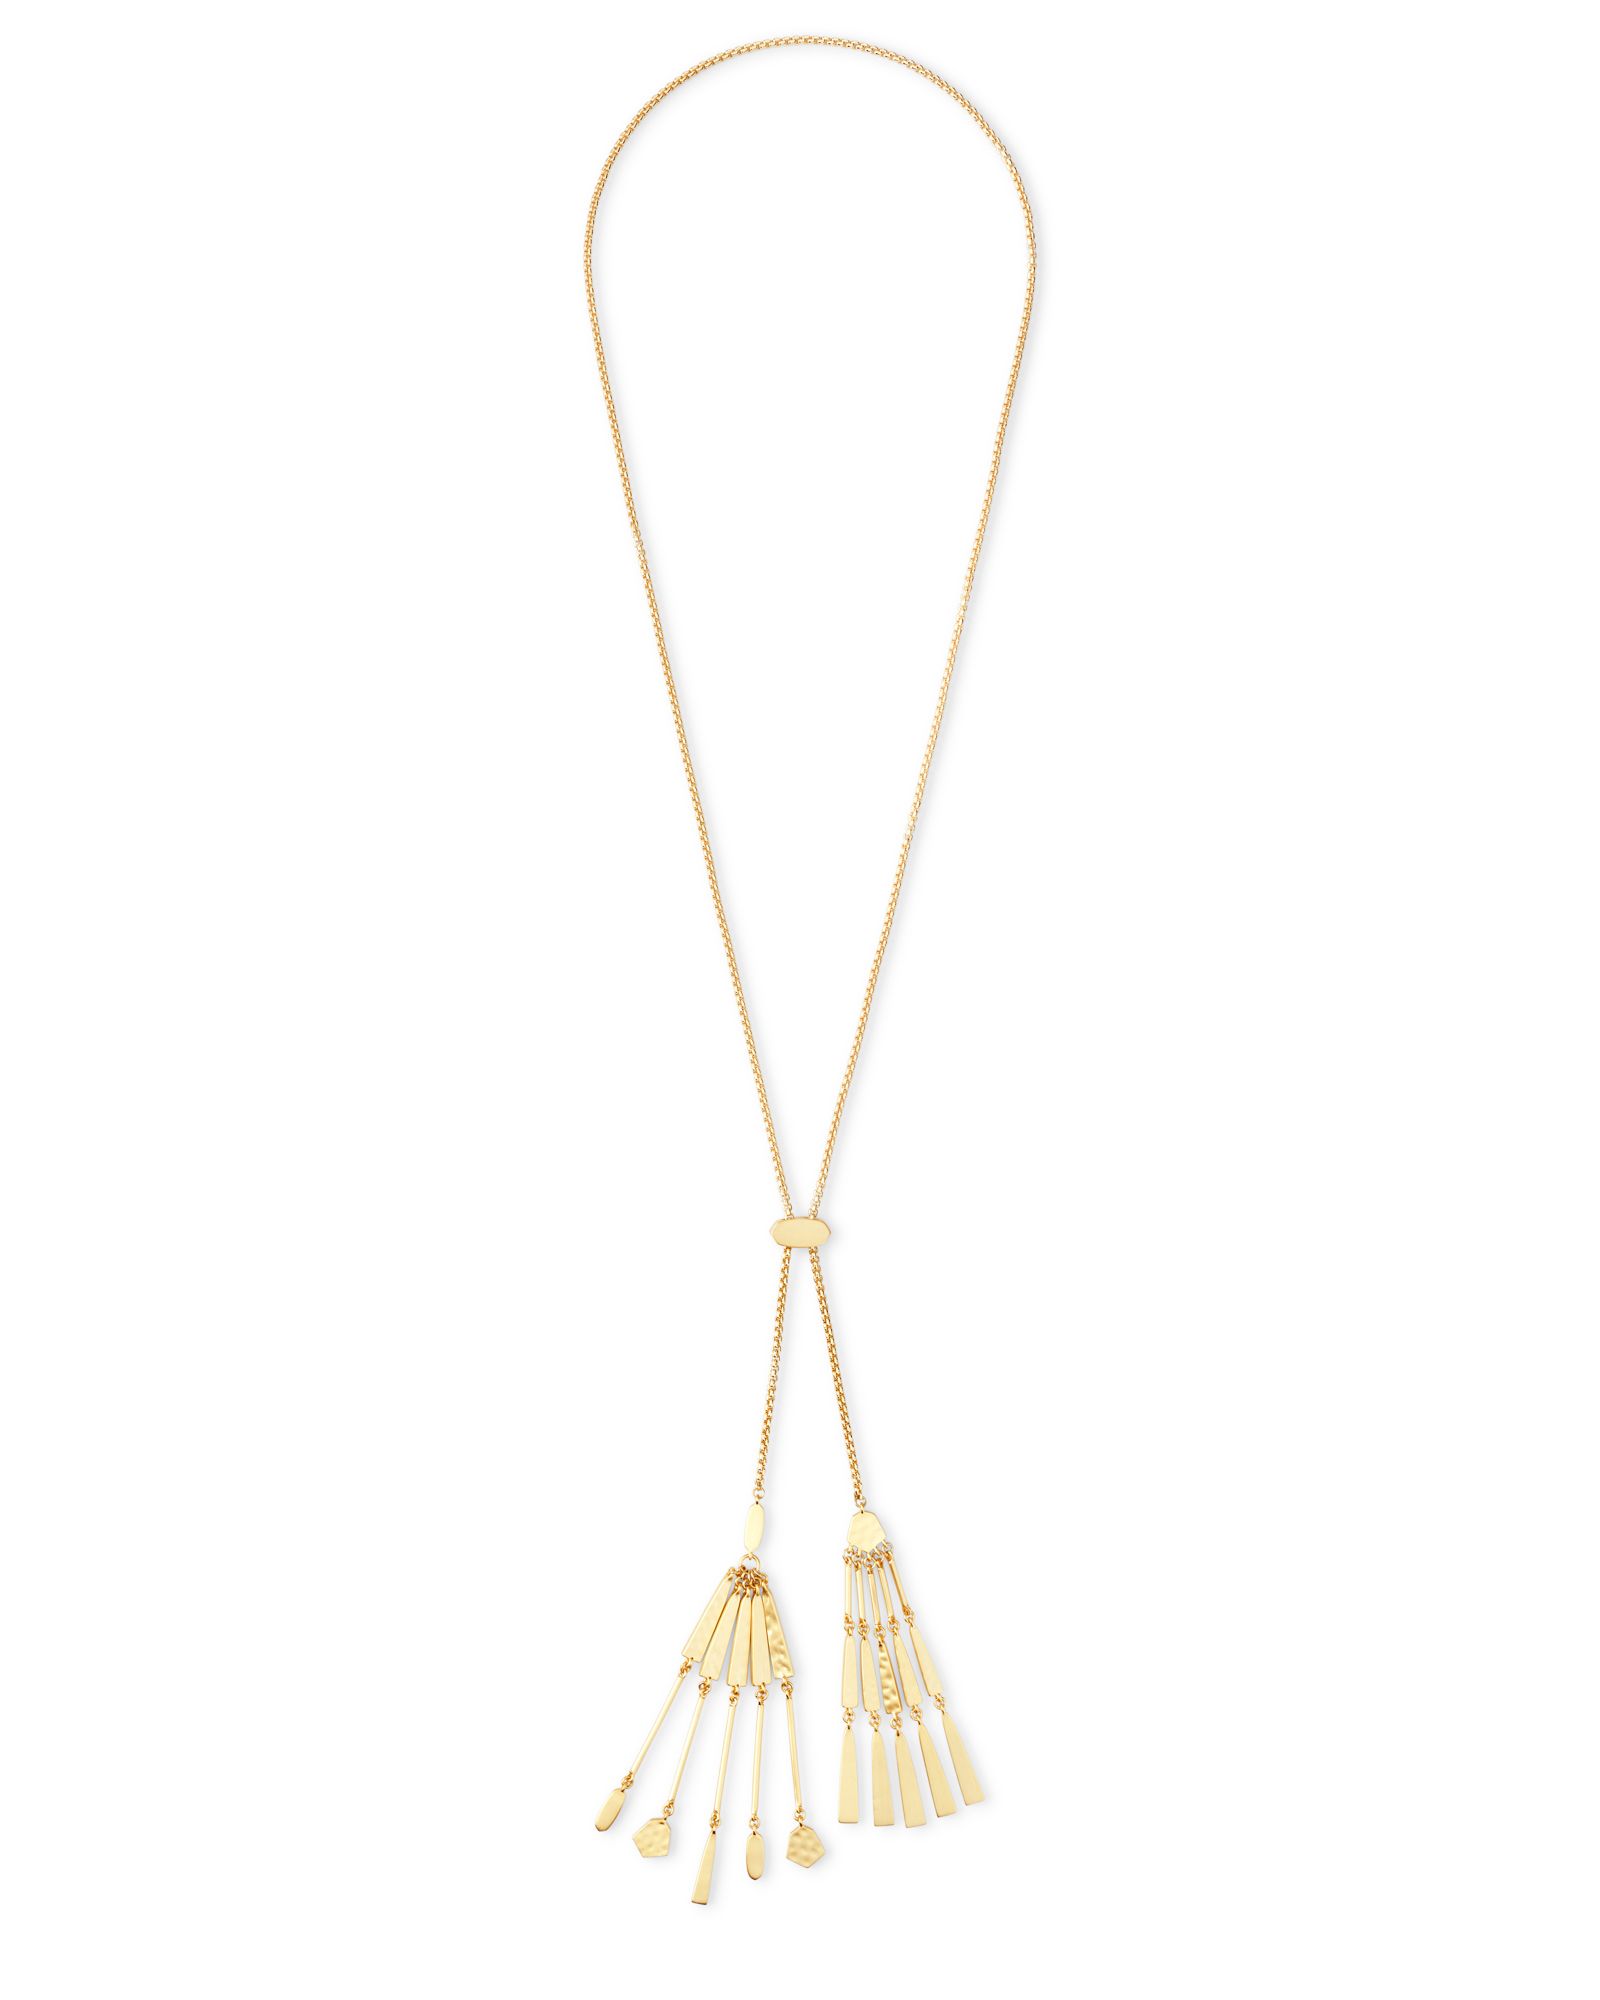 Lainey Y Necklace in Gold | Kendra Scott